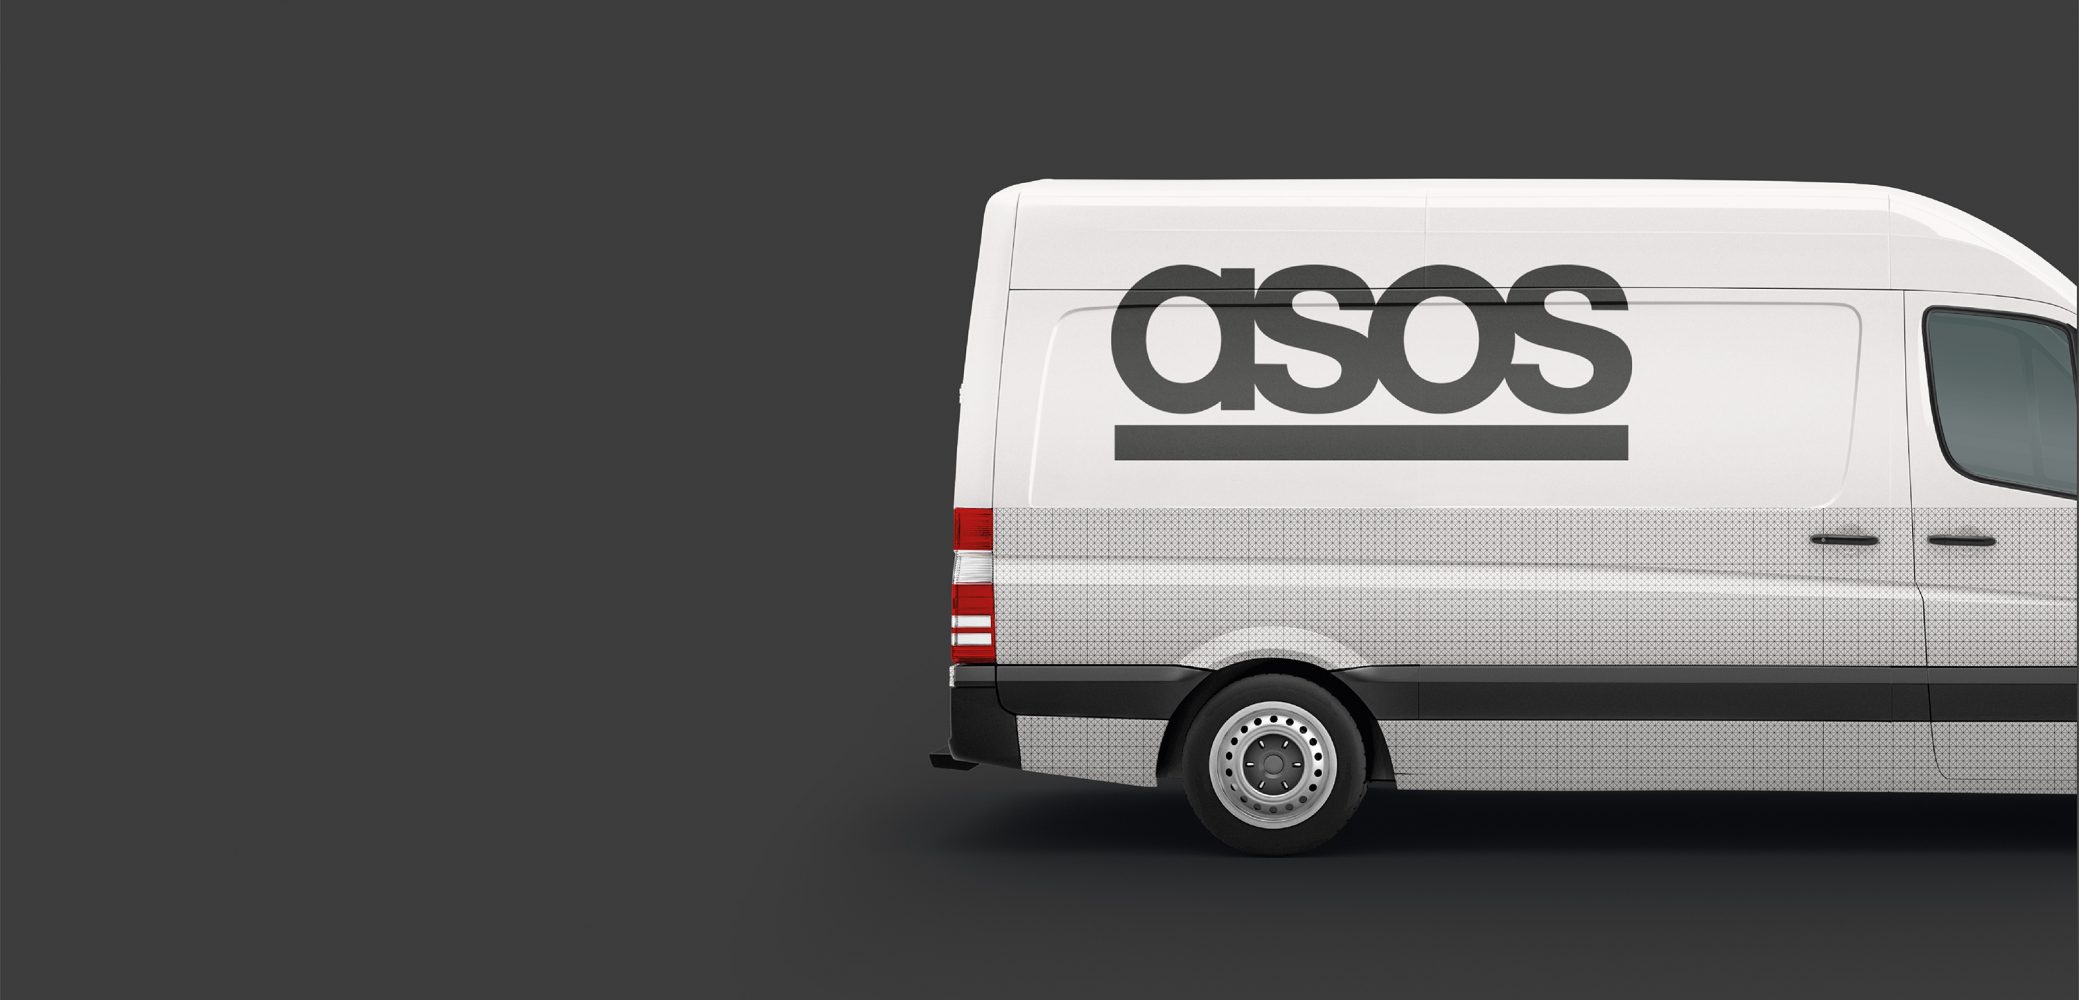 ASOS logo branded on van, brand identity, labelling and packaging design by Household.